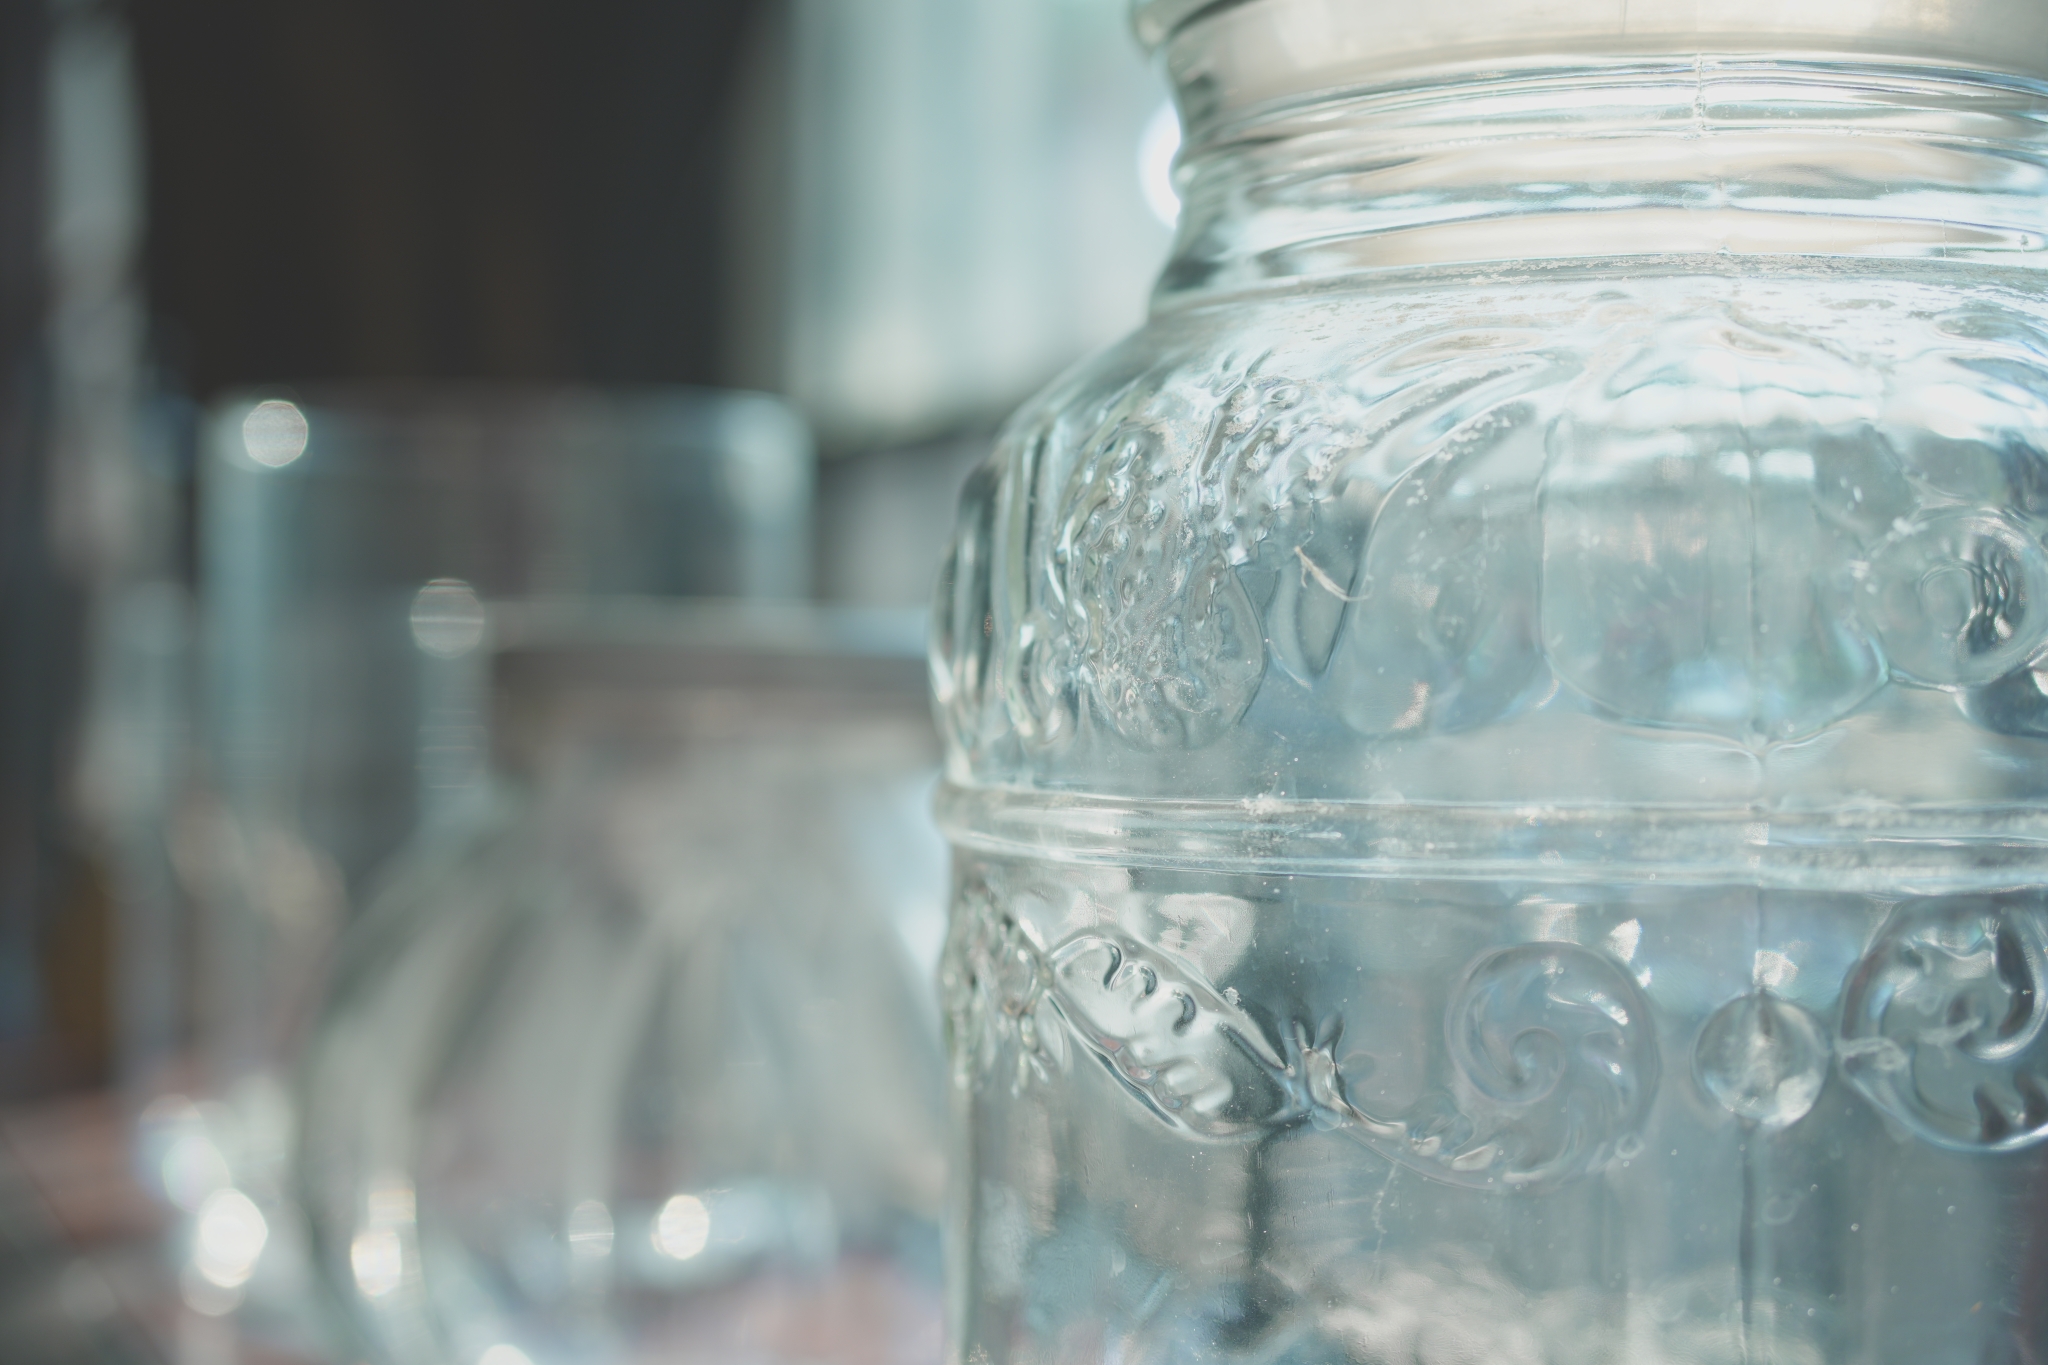 Close-up of a glass jar with jars in bokeh background